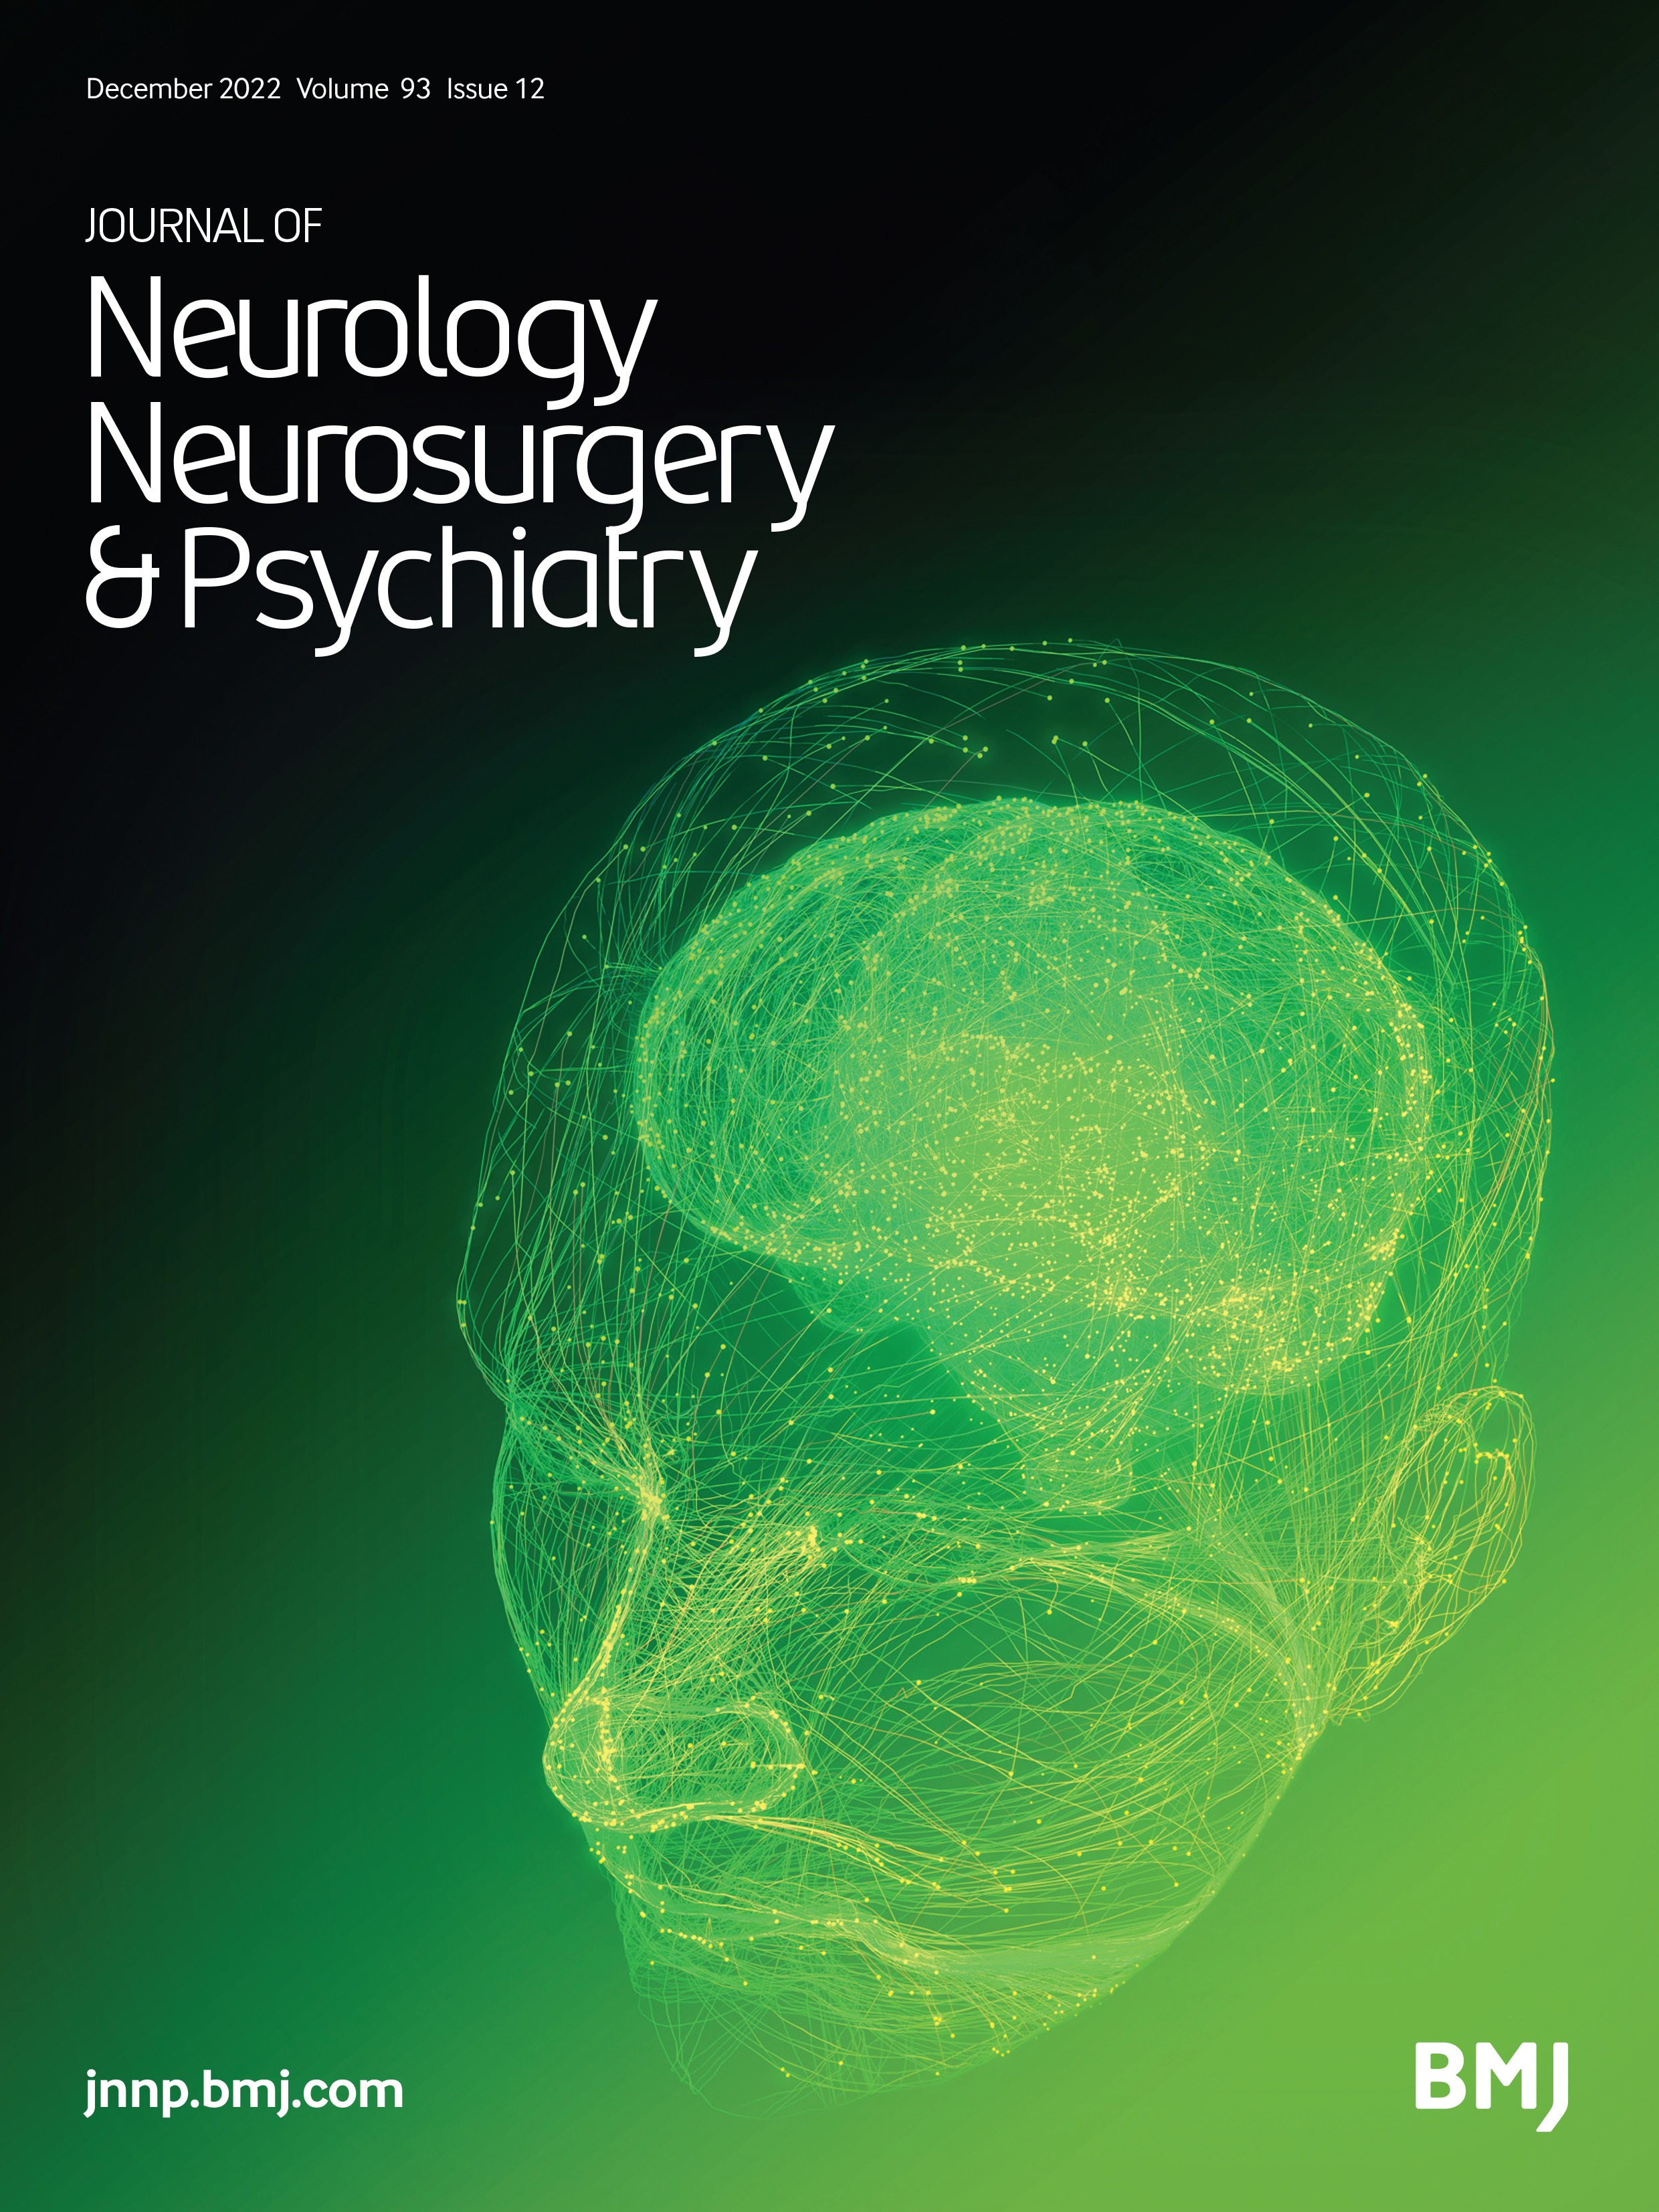 34 A systematic review comparing symptomaticity and markers of interoception in patients with functional seizures, and dual diagnosis epilepsy with functional seizures